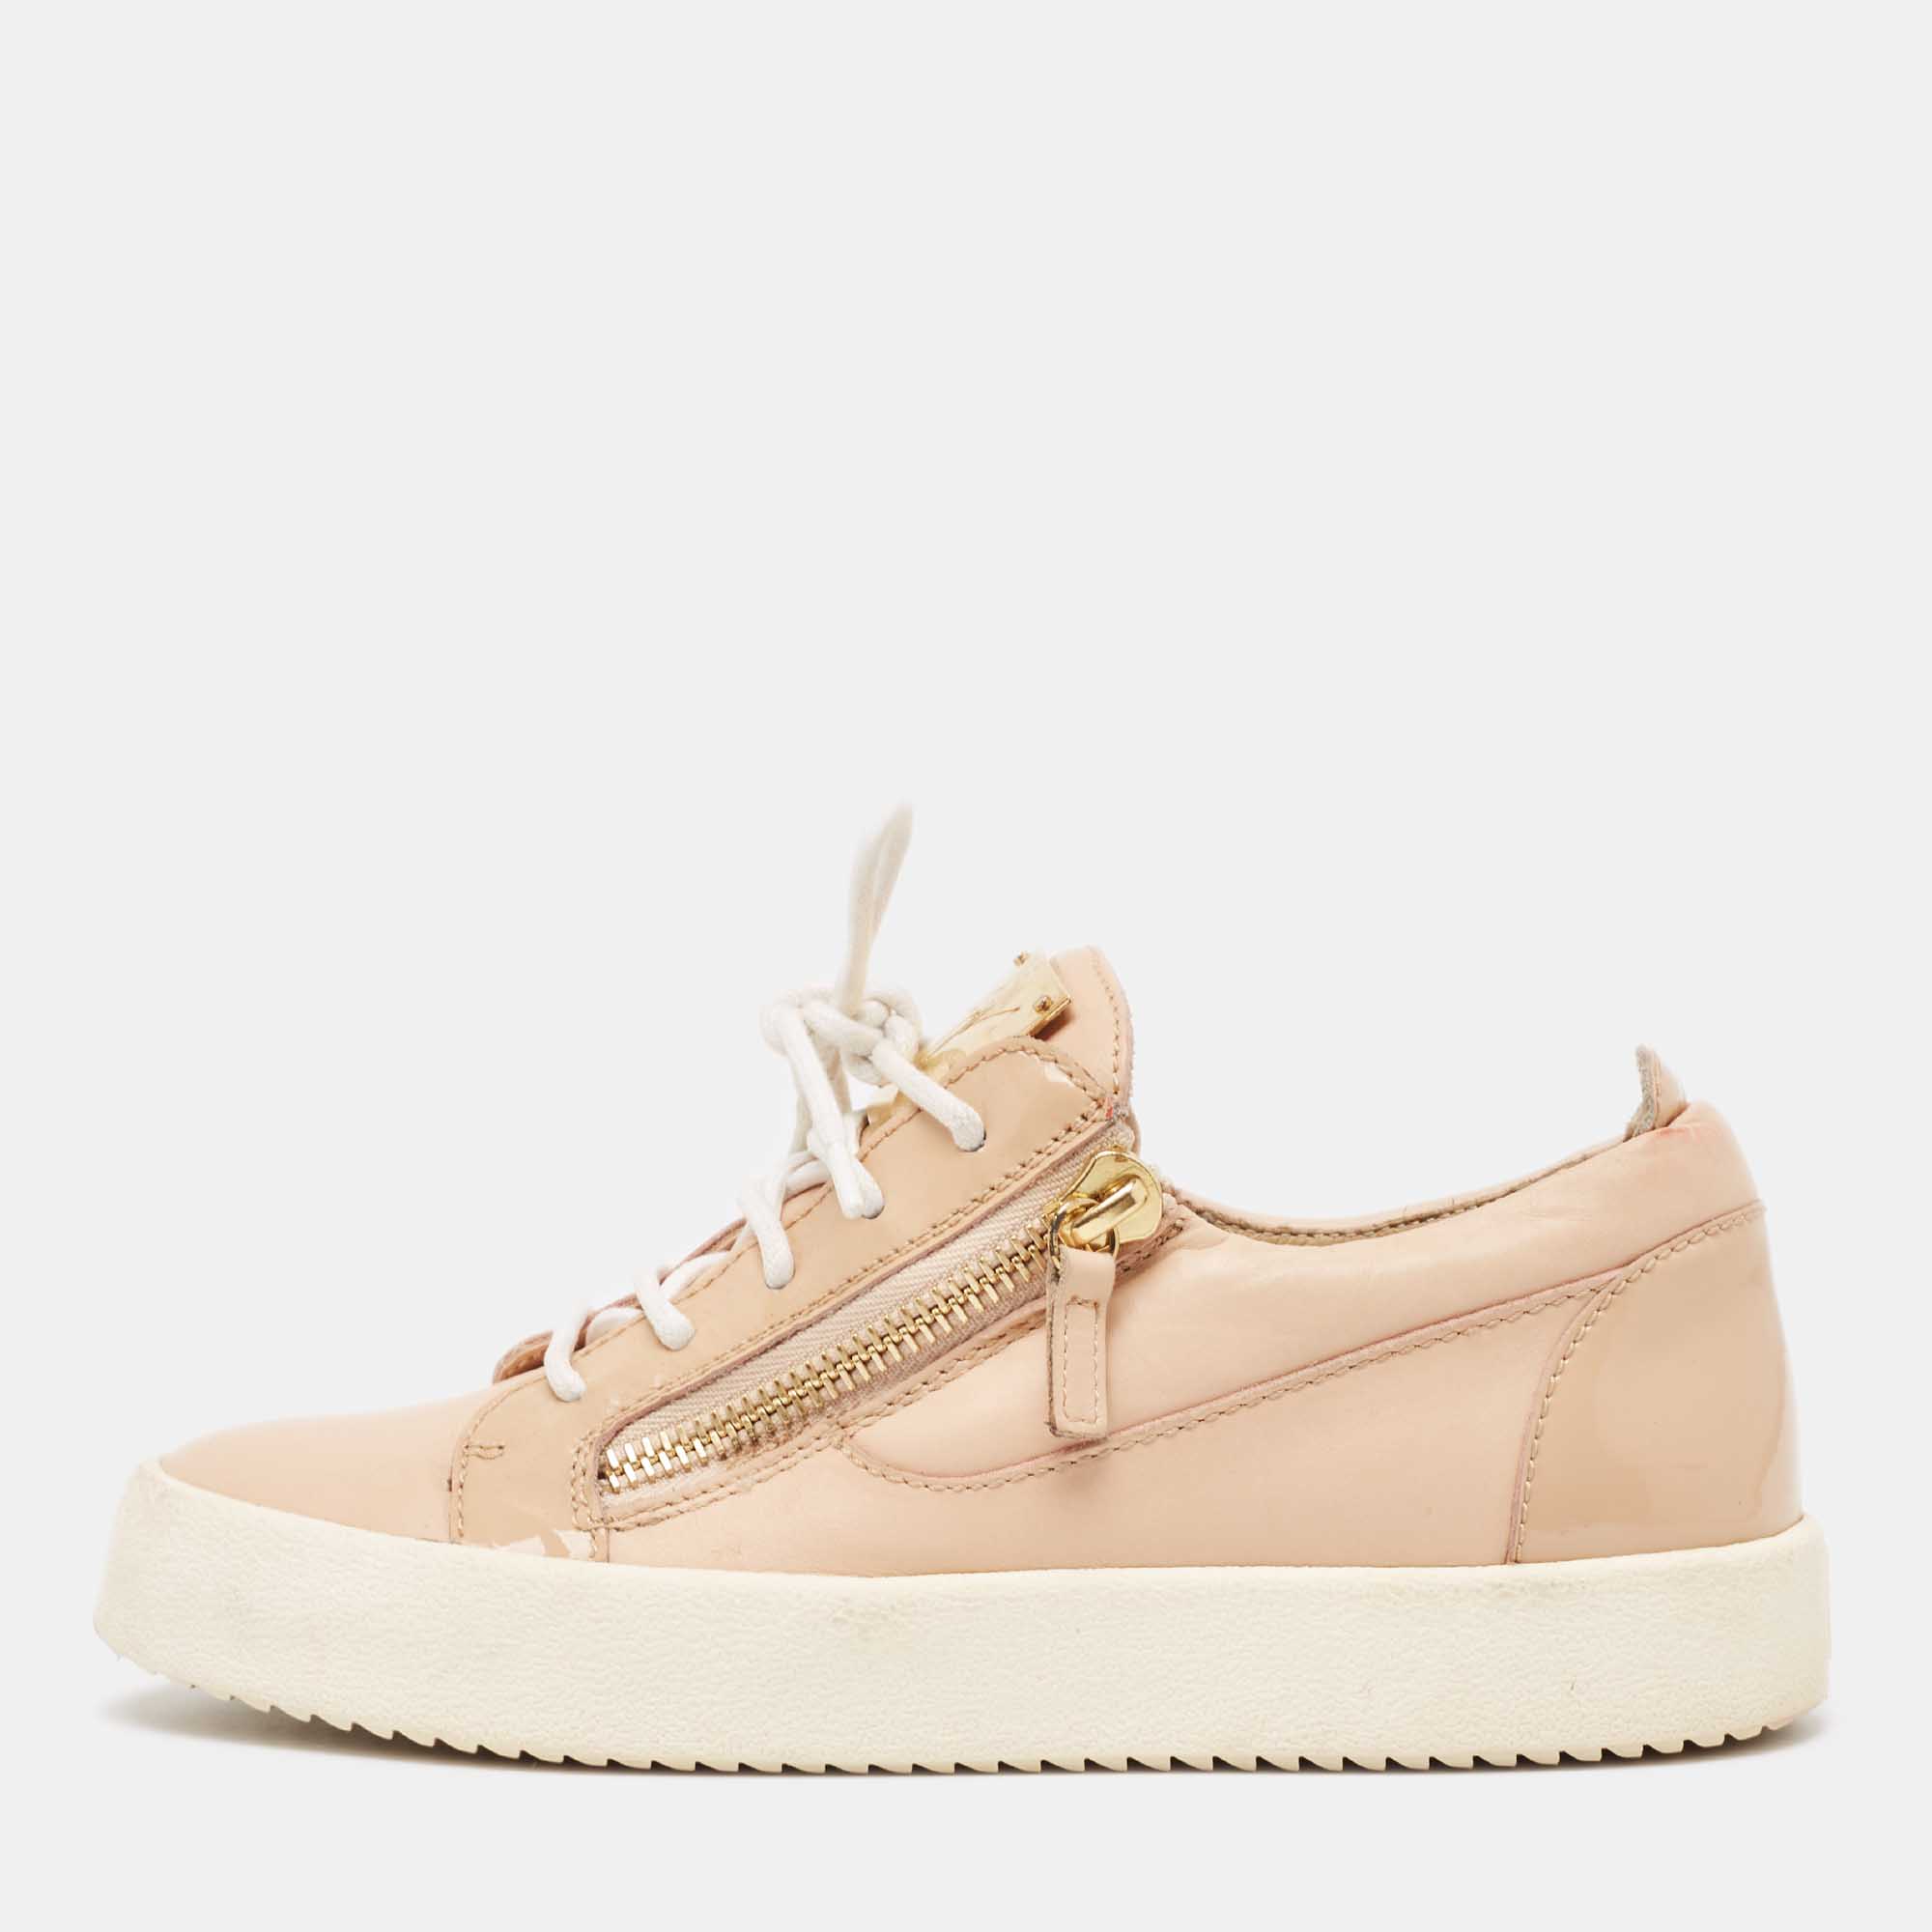 Giuseppe zanotti beige patent and leather double zipper low top sneakers size 39